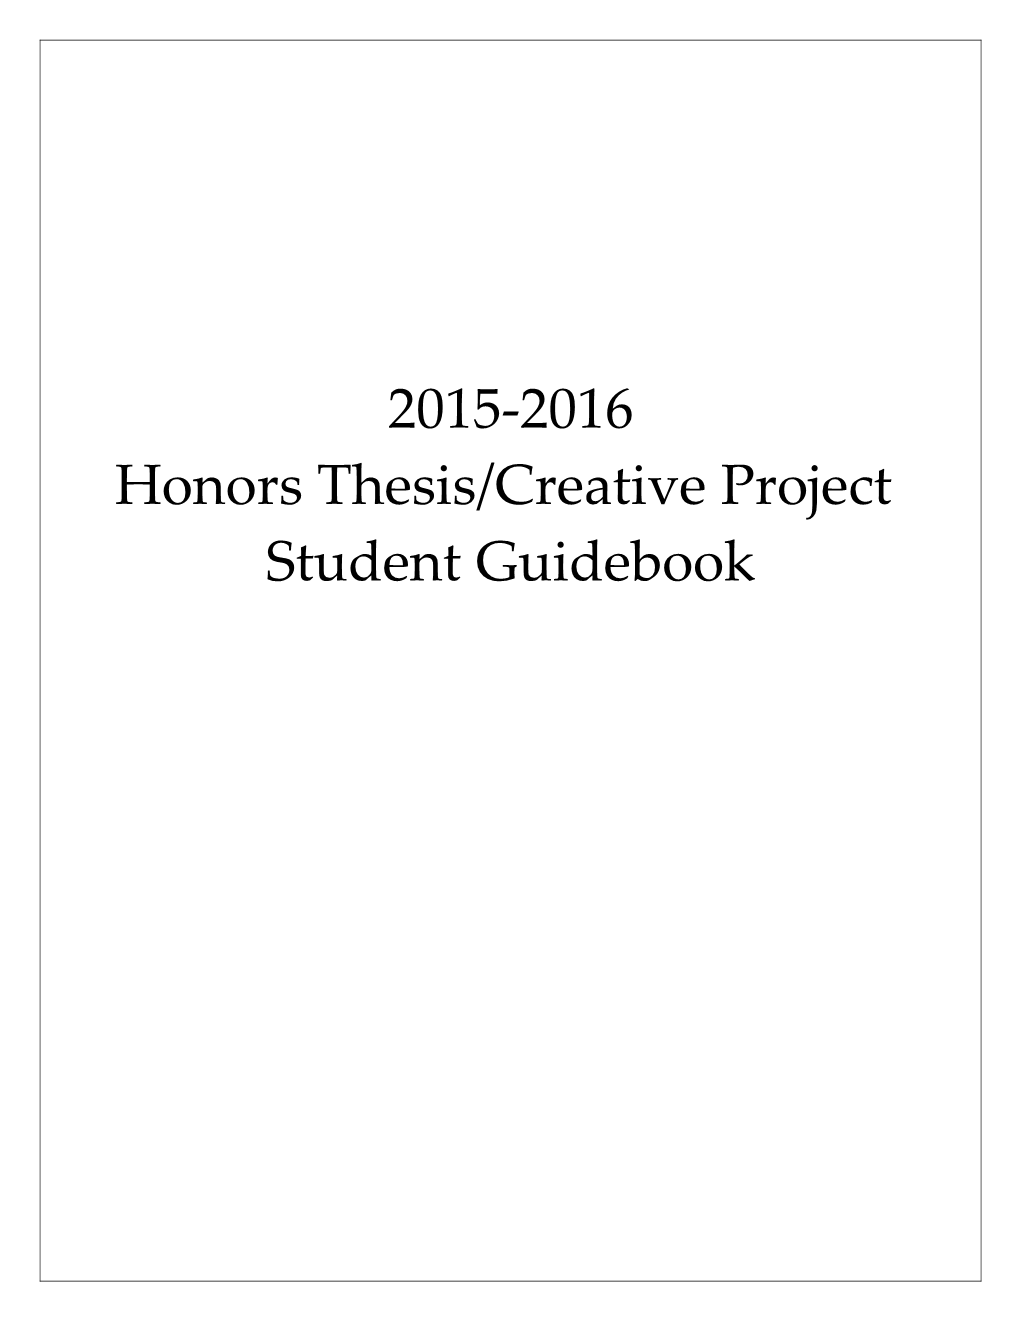 Honors Thesis/Creative Project